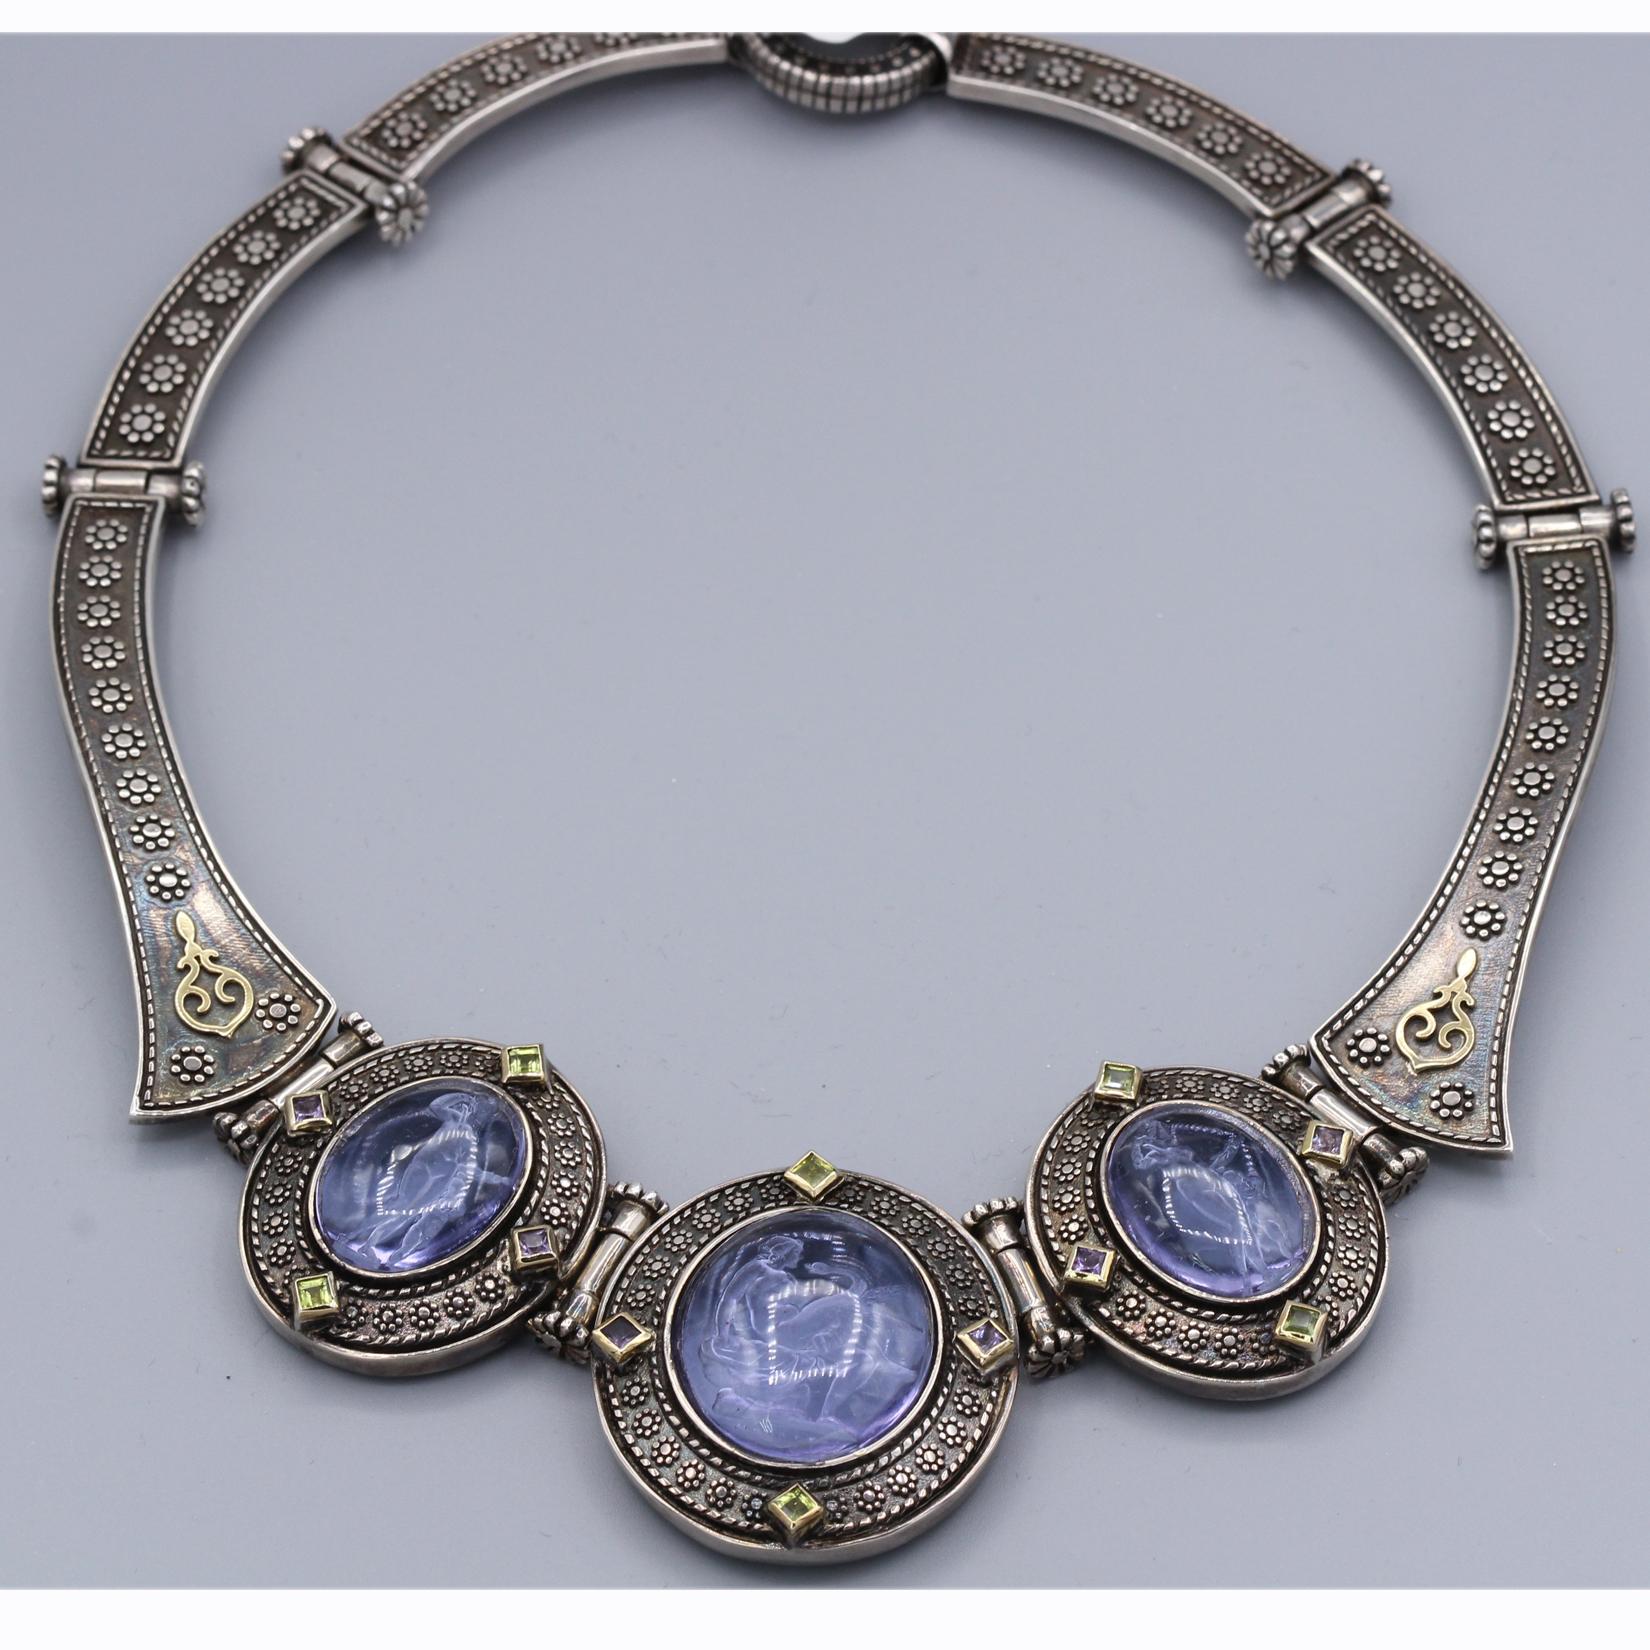 Necklace + Bracelet Set
Cameo of Greek Zeus, Swan & Leda Gods
Carved in Venetian Purple Murano Glas.
Antique / Gothic Style Vintage Necklace and Bracelet

Sterling Silver 925, approx 150 Grams, 
with small natural Amethyst & Peridot stones,
set with